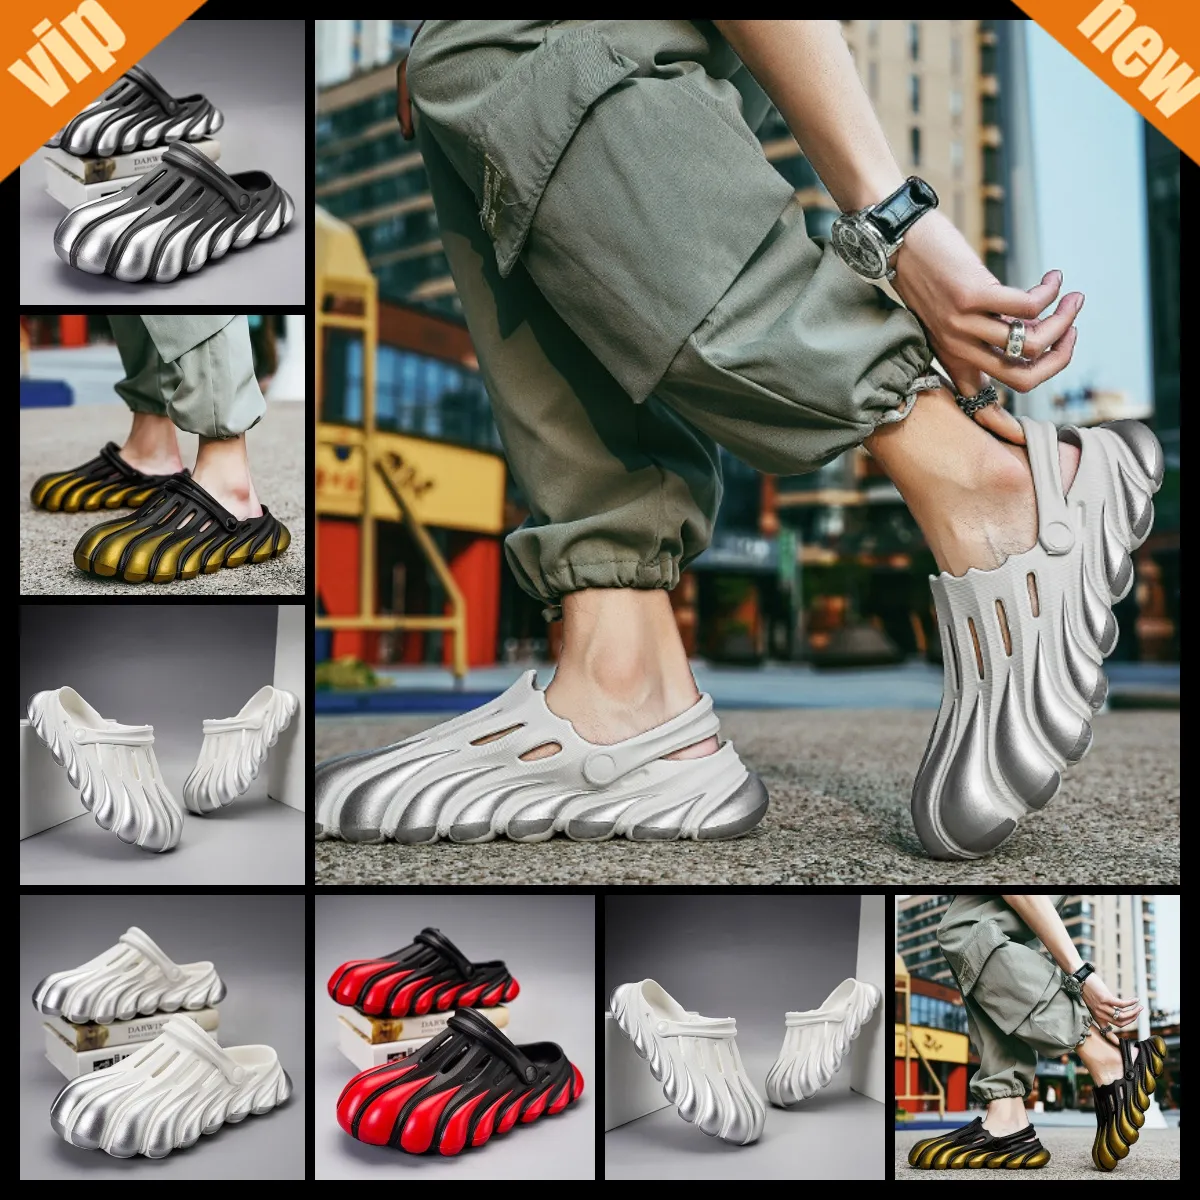 Painted Five Claw Golden Dragon EVA Hole Shoes with a Feet Feeling Thick Sole Summer Beach Breathable Slippers COOL SUMMER daily non-slip new male fashion eva cool red